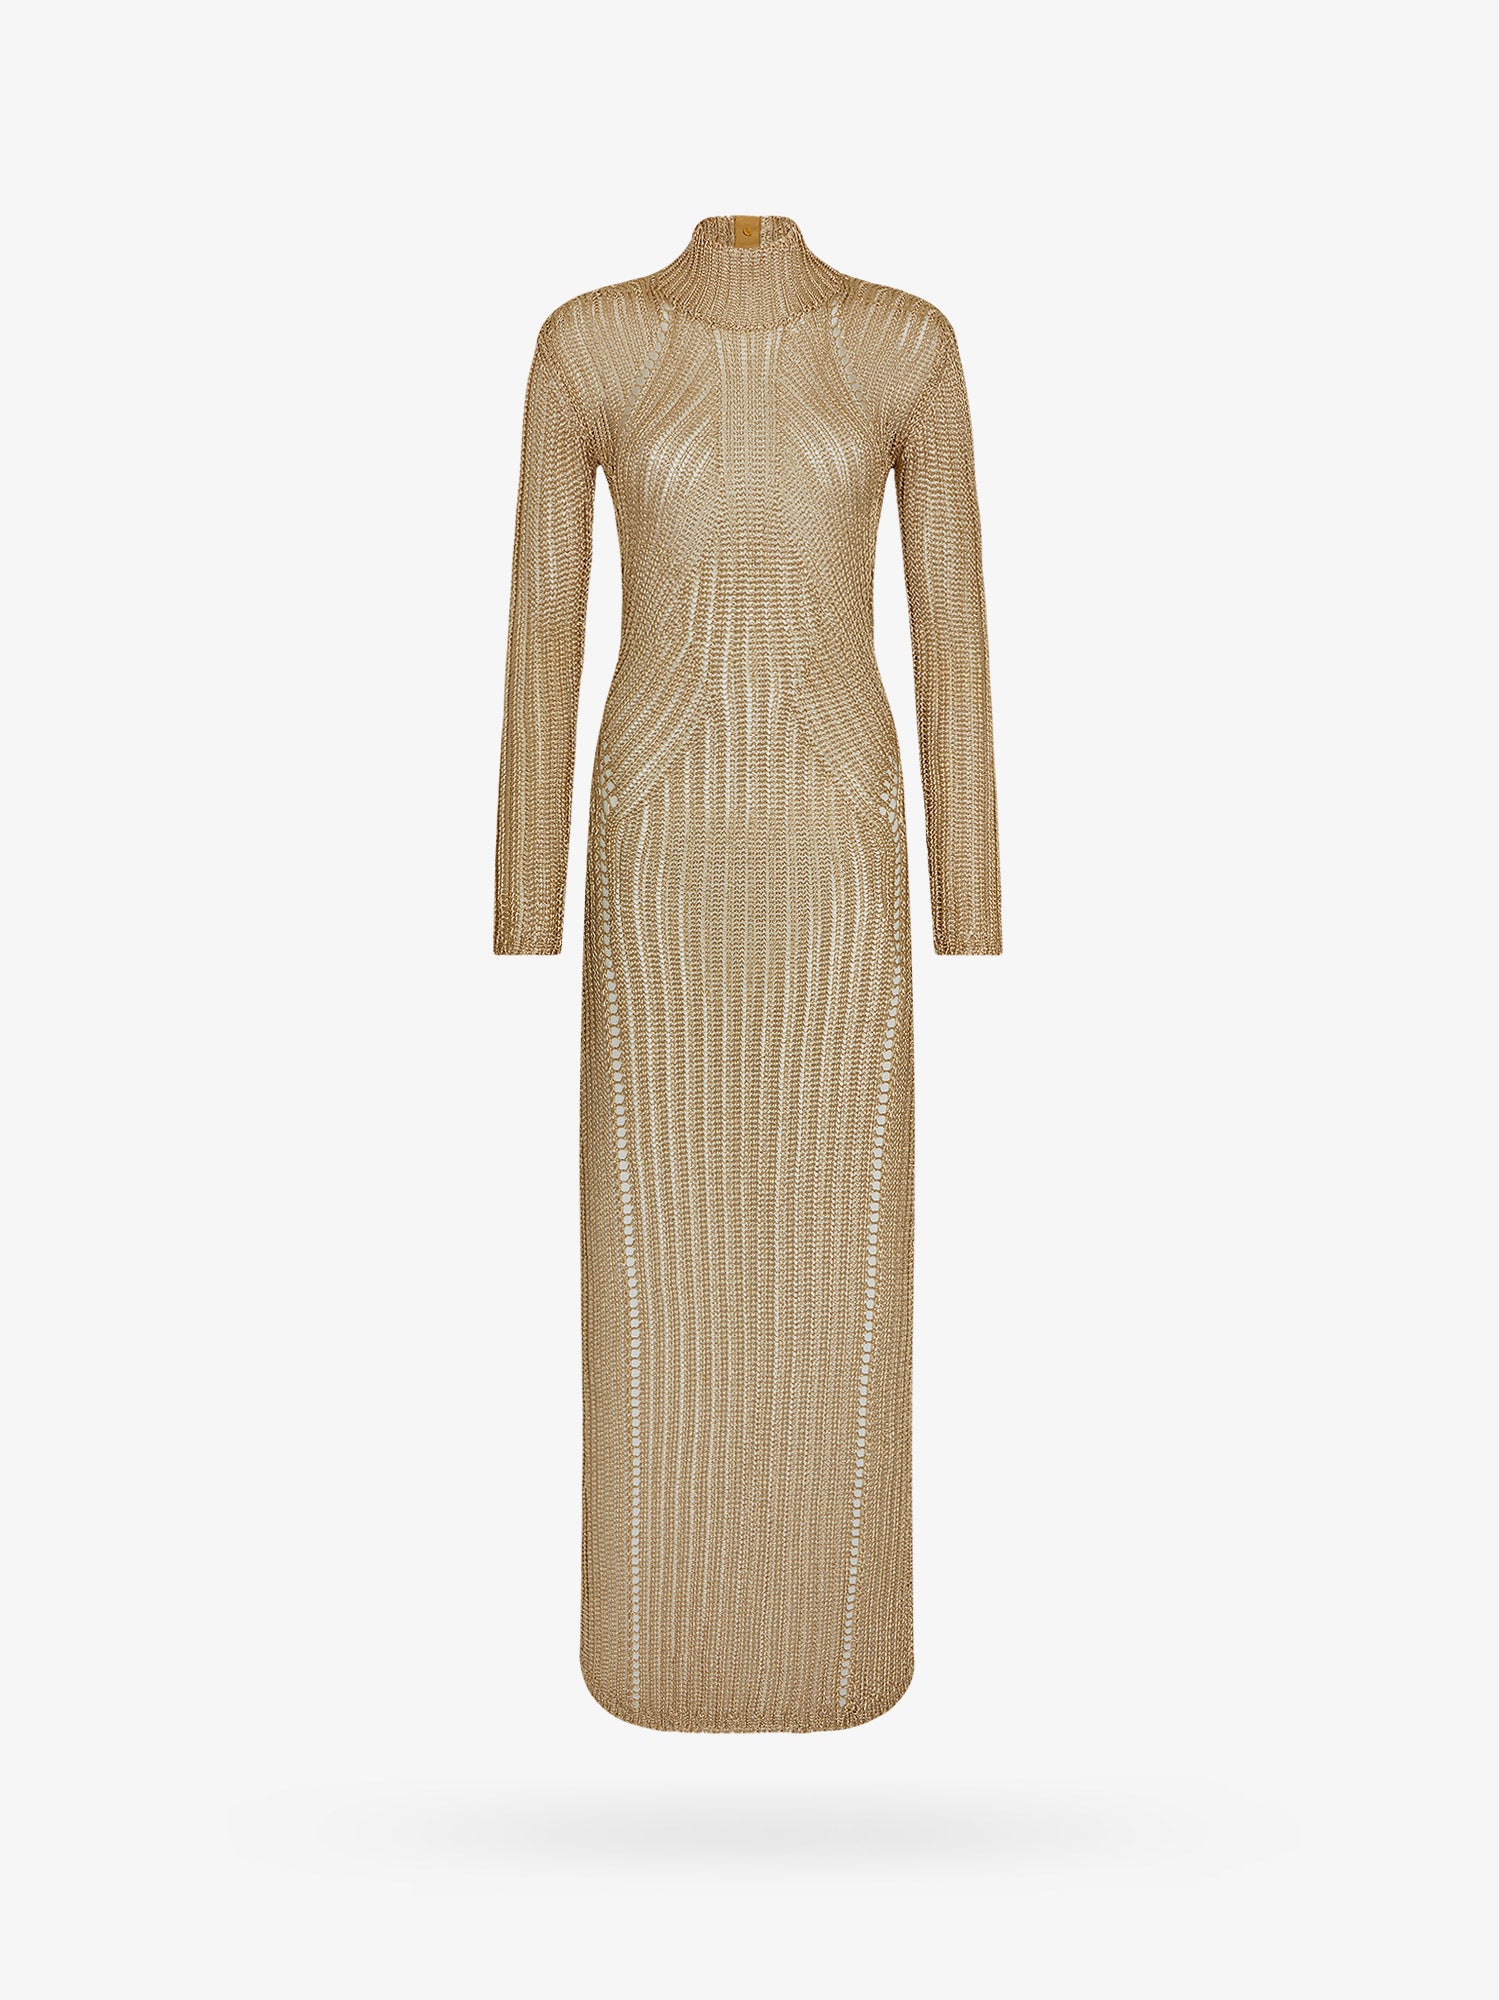 Tom Ford Dress In Gold